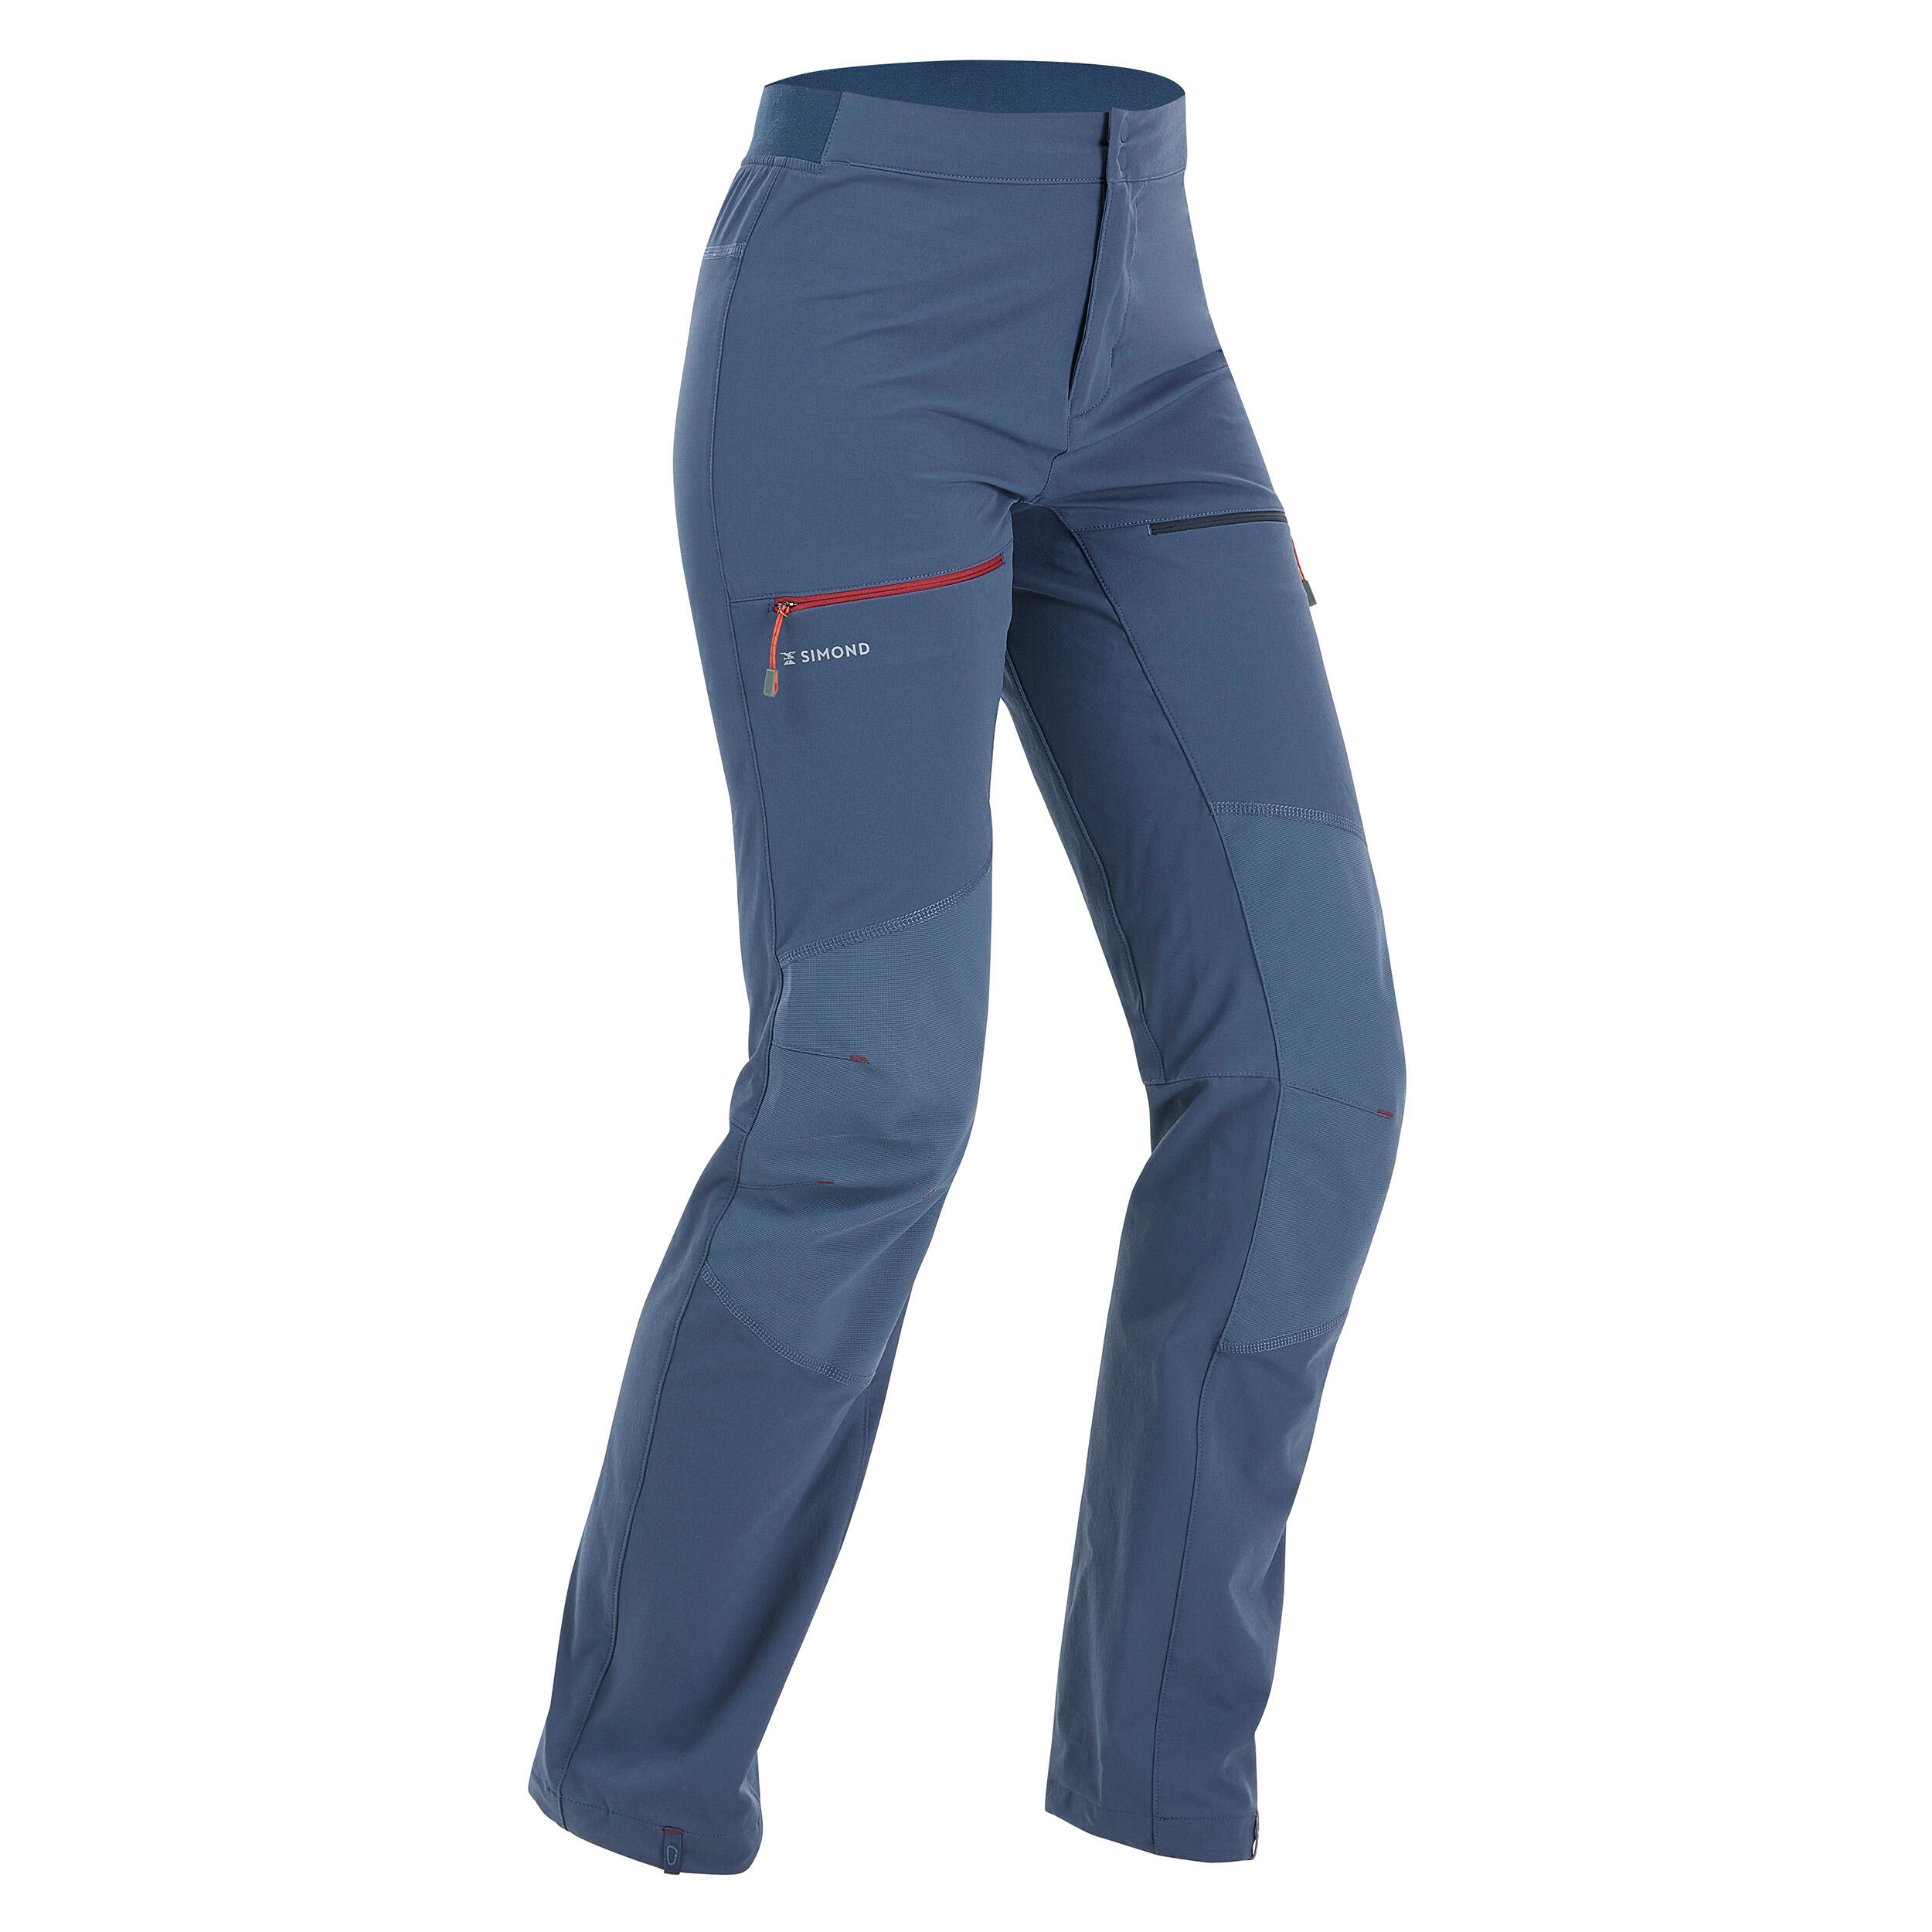 Men's climbing and mountaineering lightweight trousers - ROCK EVO - Blue 10/10